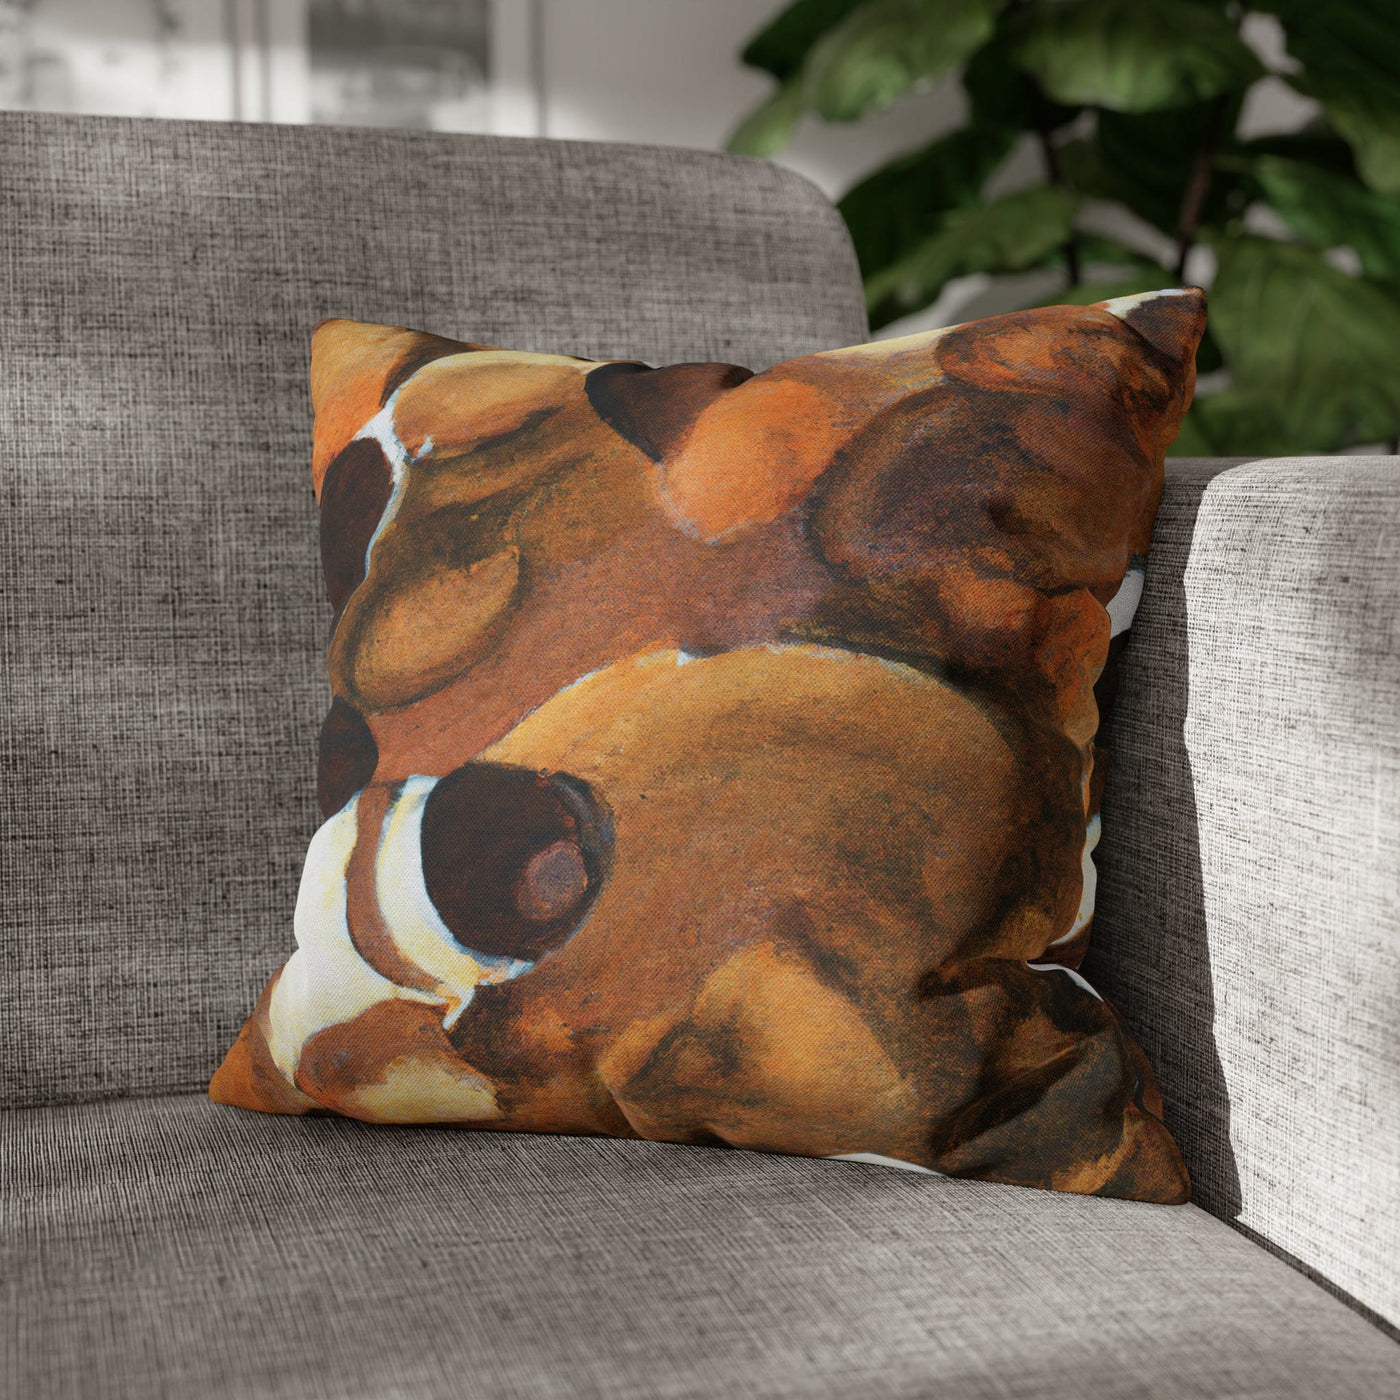 Decorative Throw Pillow Covers With Zipper - Set Of 2 Brown White Stone Pattern